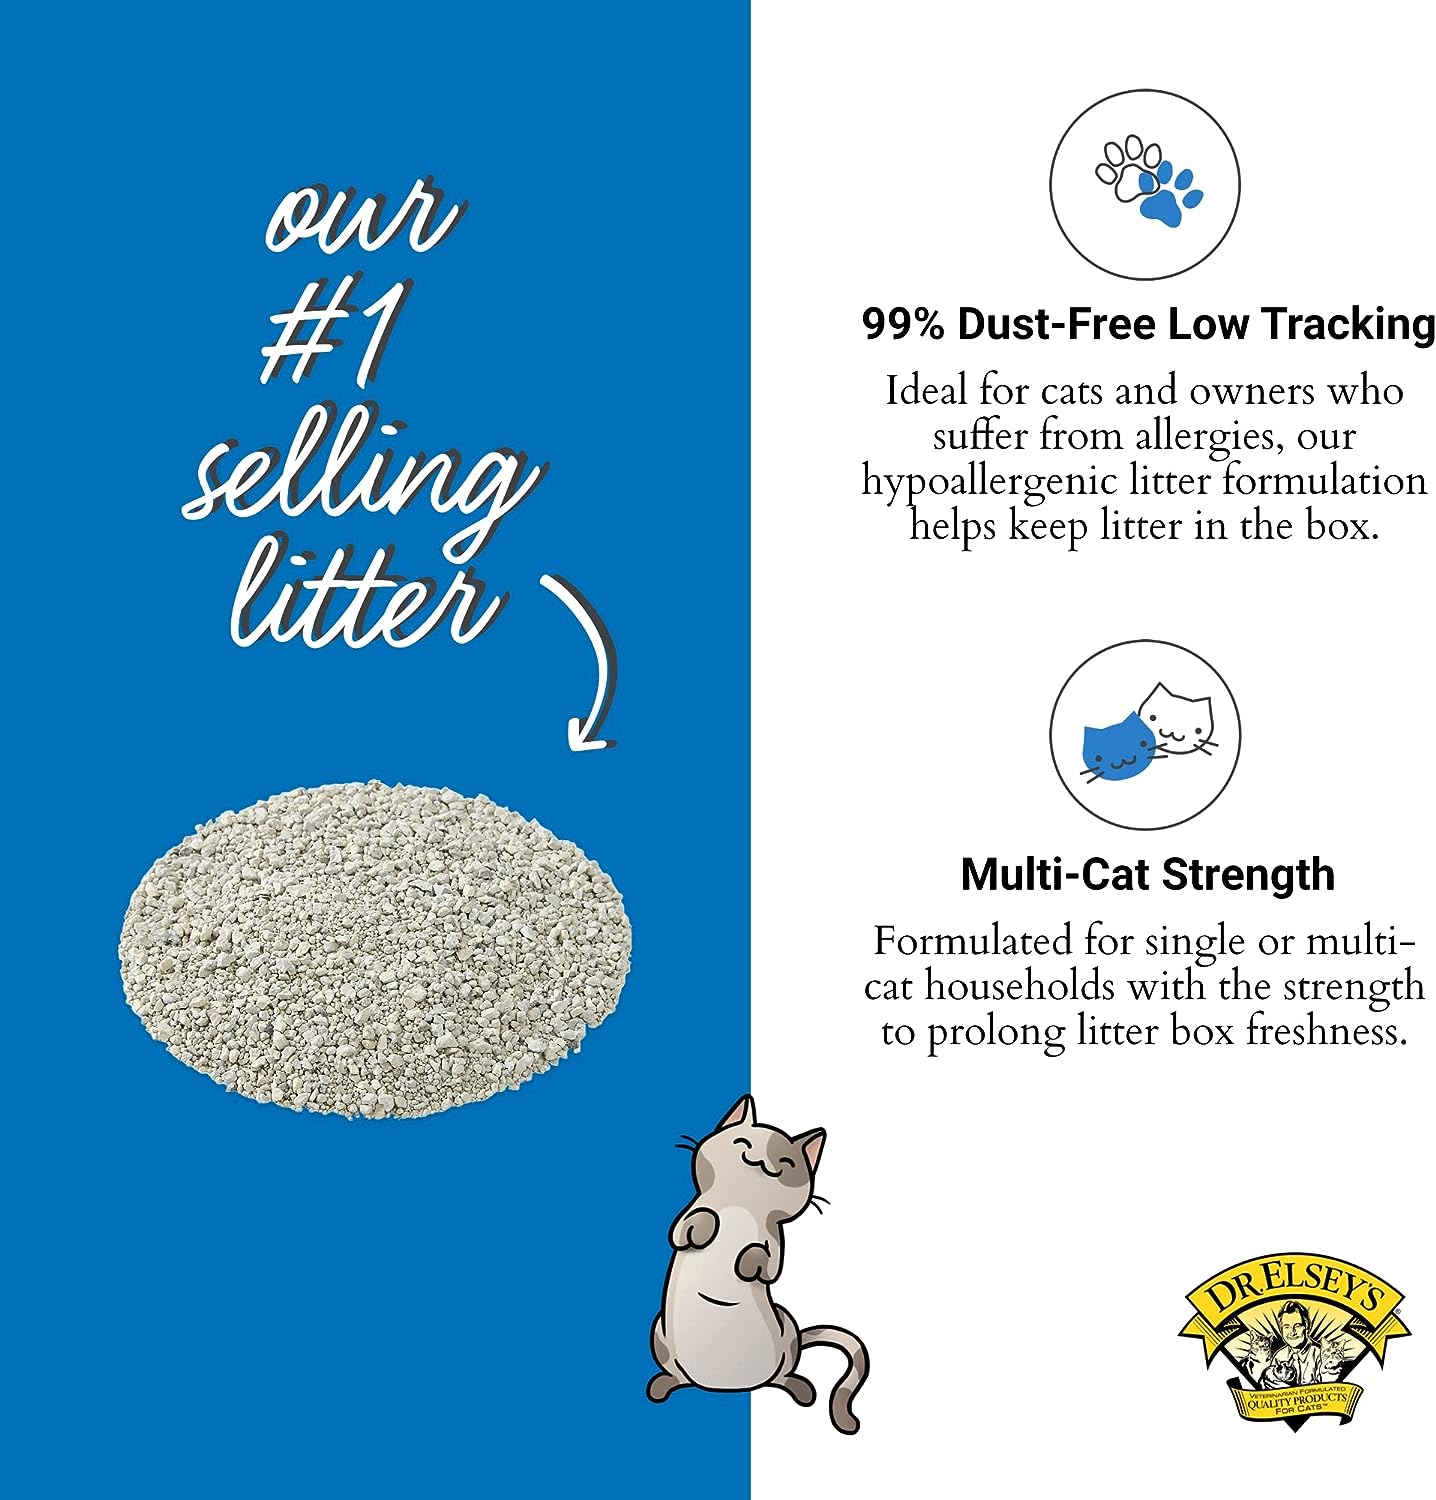 Dr Elsey's Precious Cat Ultra Hard Clumping Non Scented 99% Dust Free 8kg